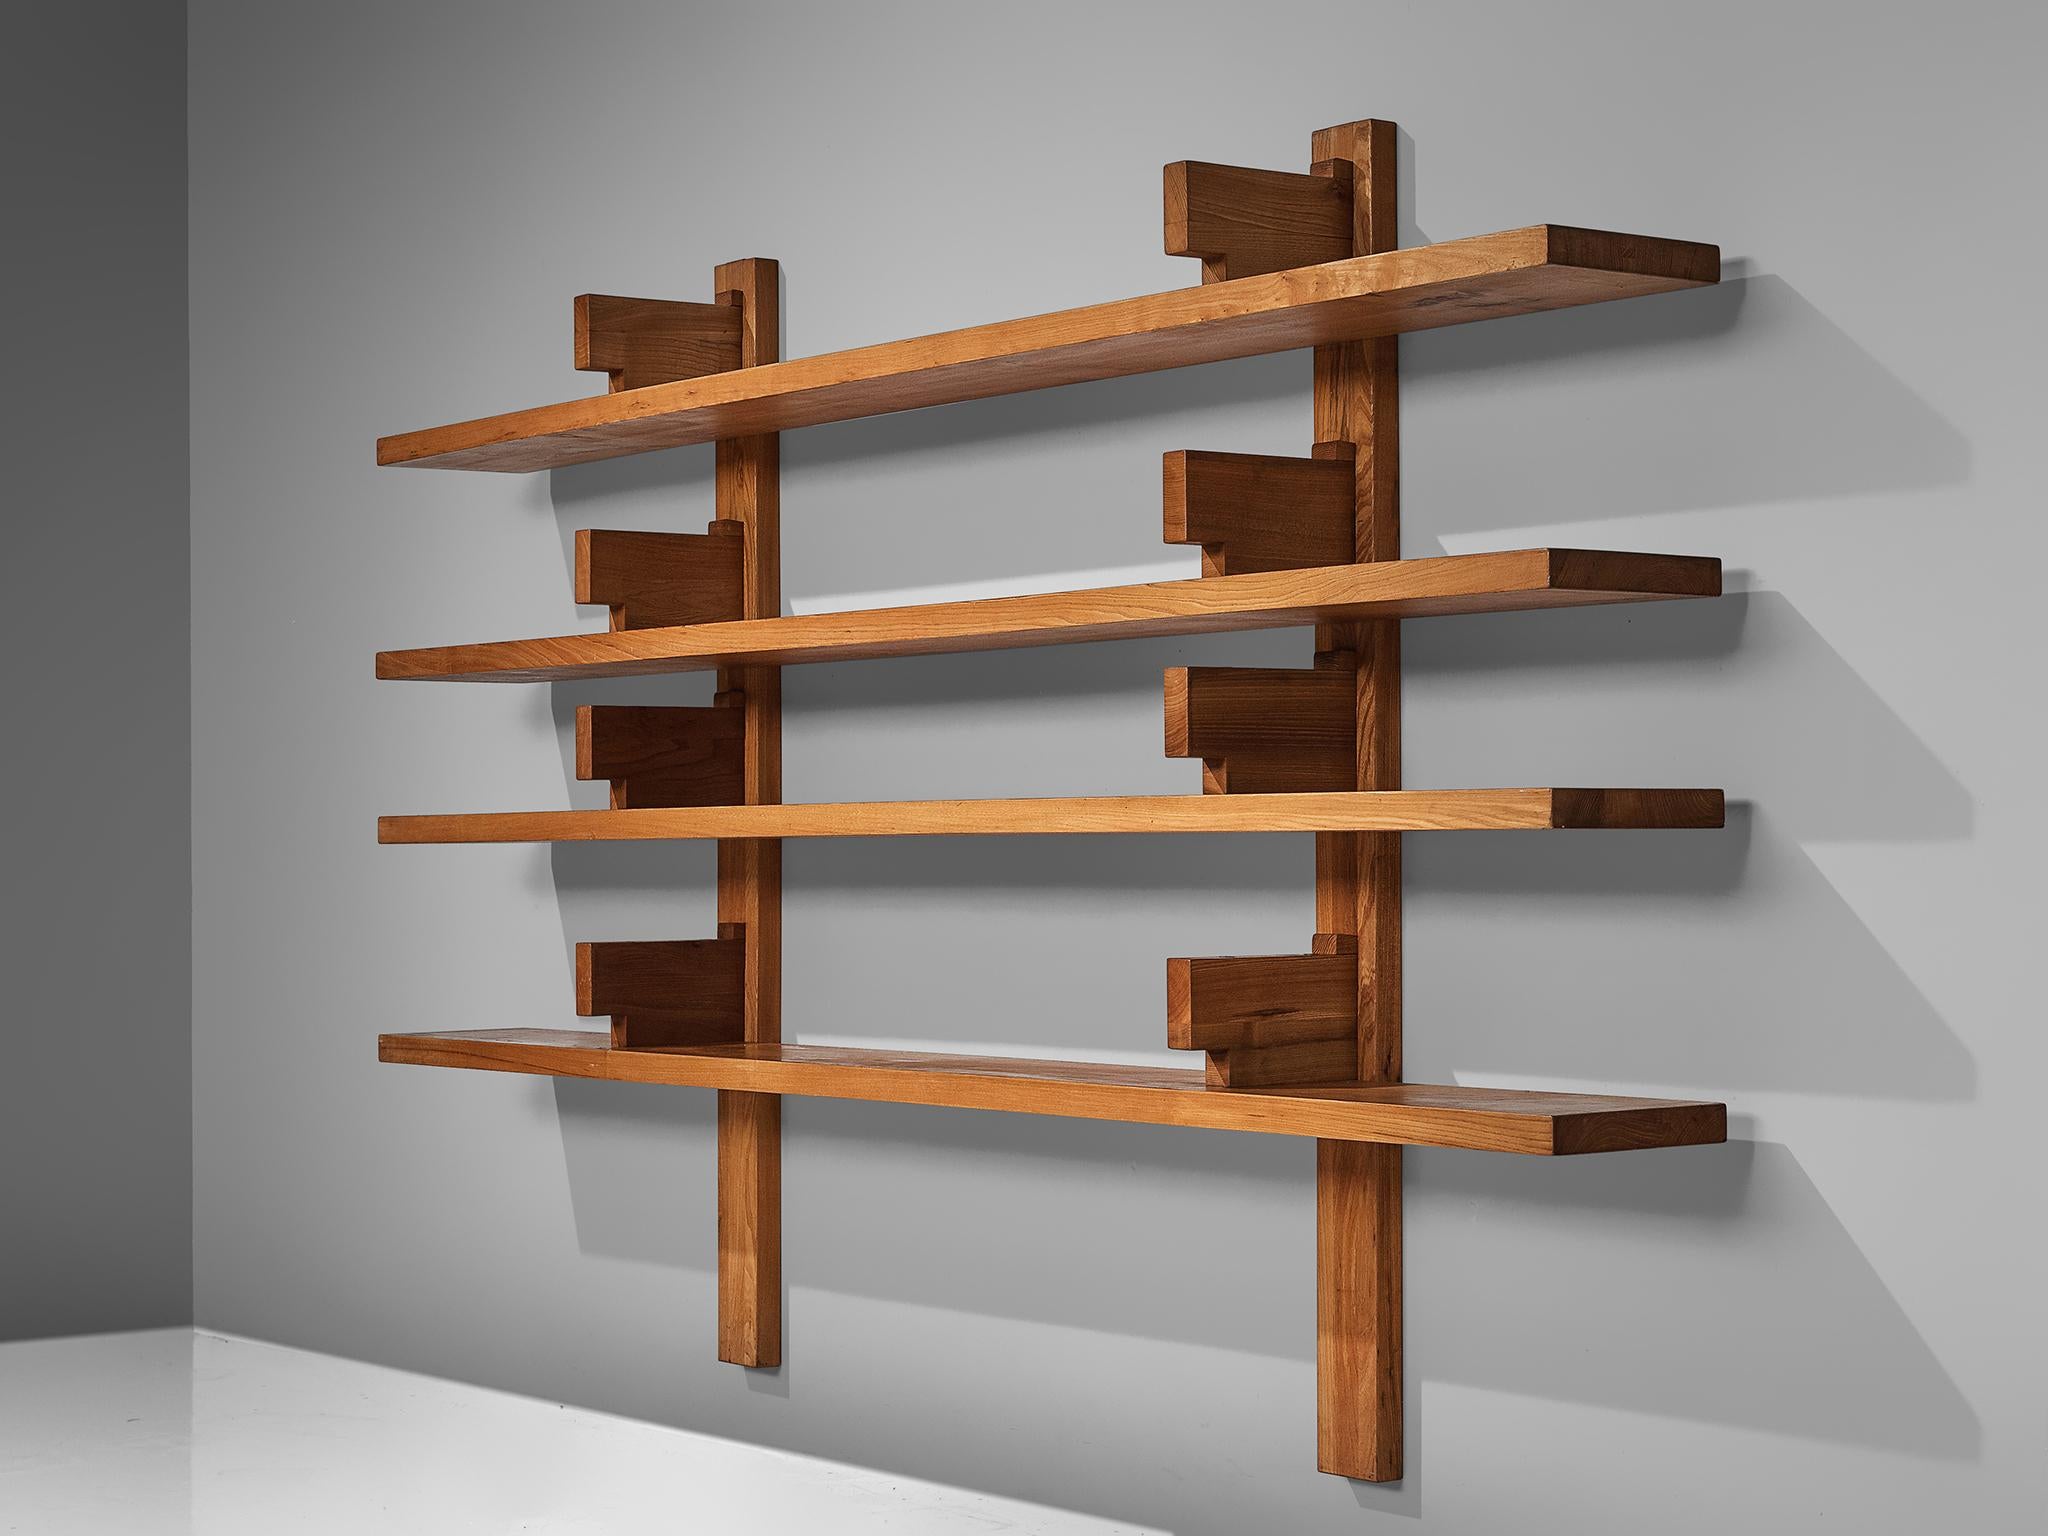 Pierre Chapo, Grande bibliothèque, model B17, elm, France, 1960s.

This is a rare and large model 'B17' wall unit designed by Pierre Chapo. It is the largest version of this quintessential piece by Chapo. The shelving system was created in 1967